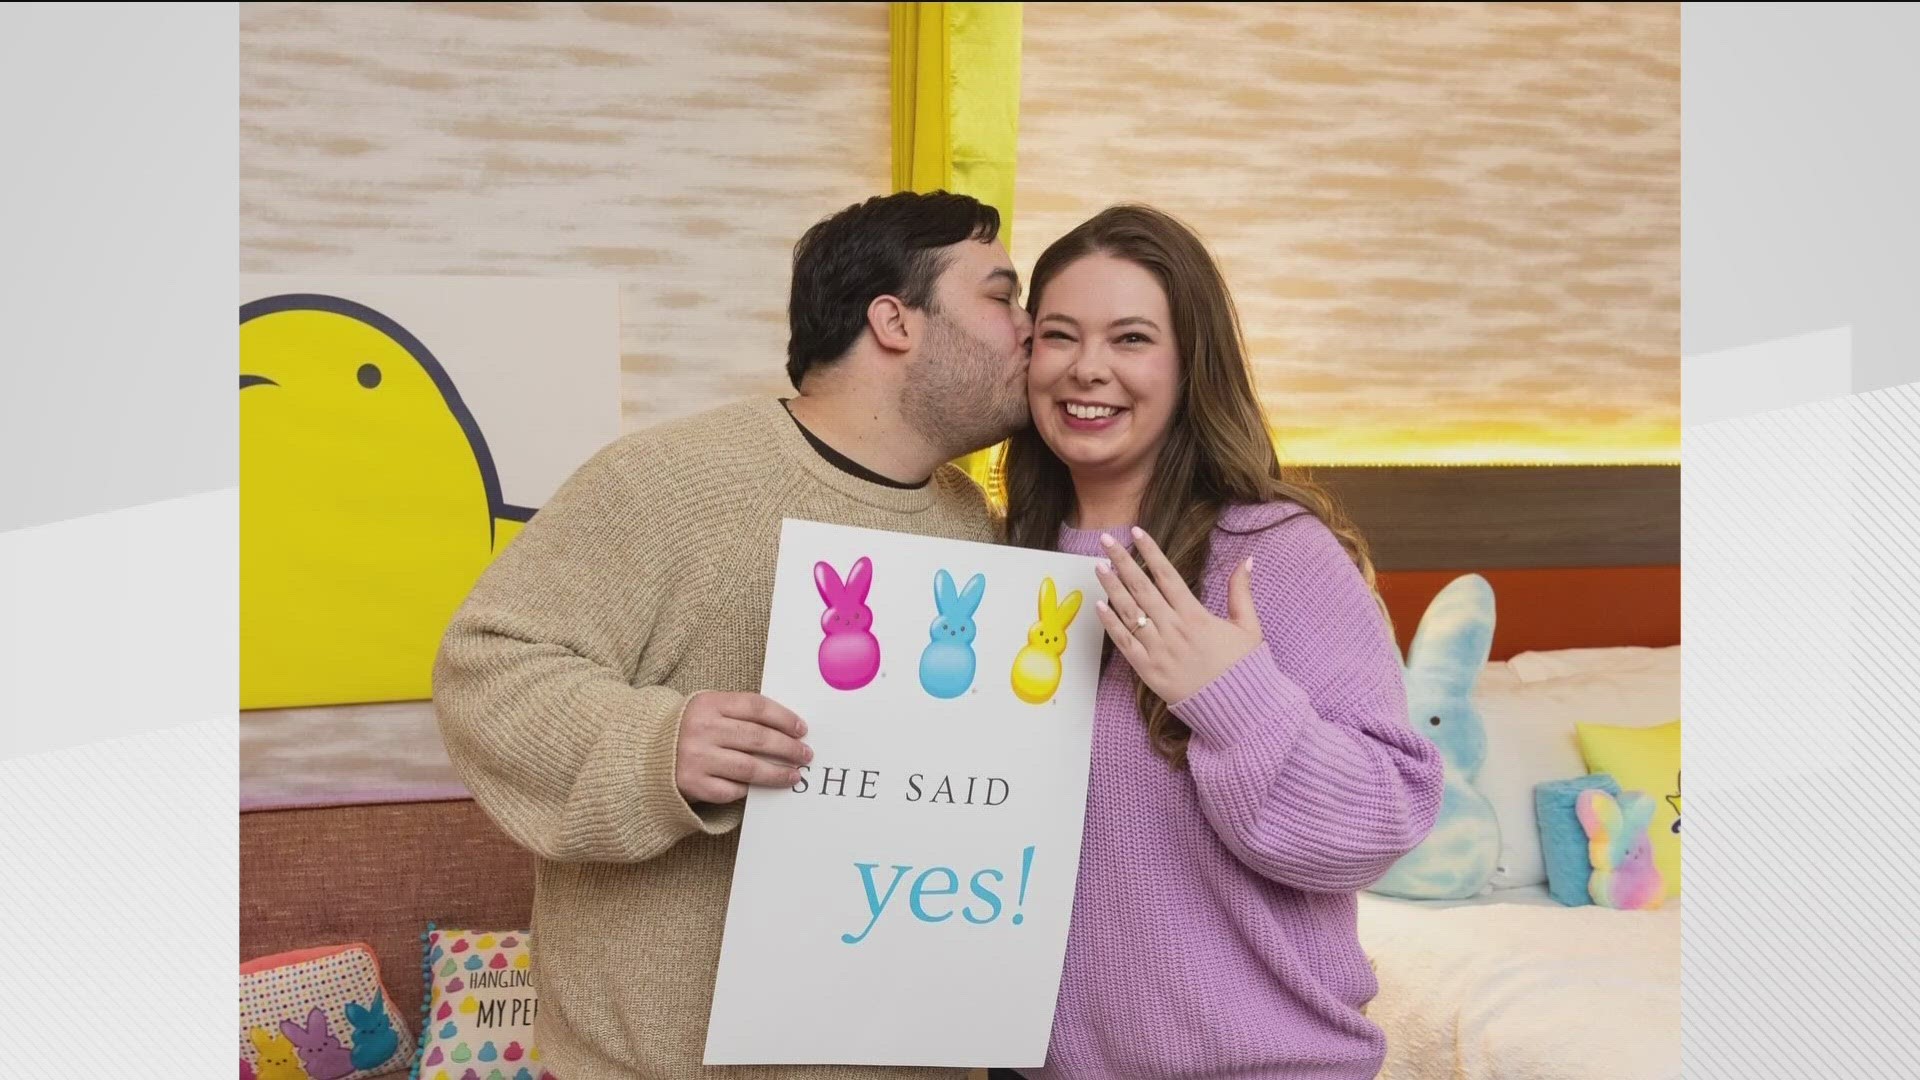 A Georgia couple is celebrating after getting engaged at a one-of-a-kind Peeps-themed marshmallow suite ahead of Easter. The proposal, of course, was very sweet.